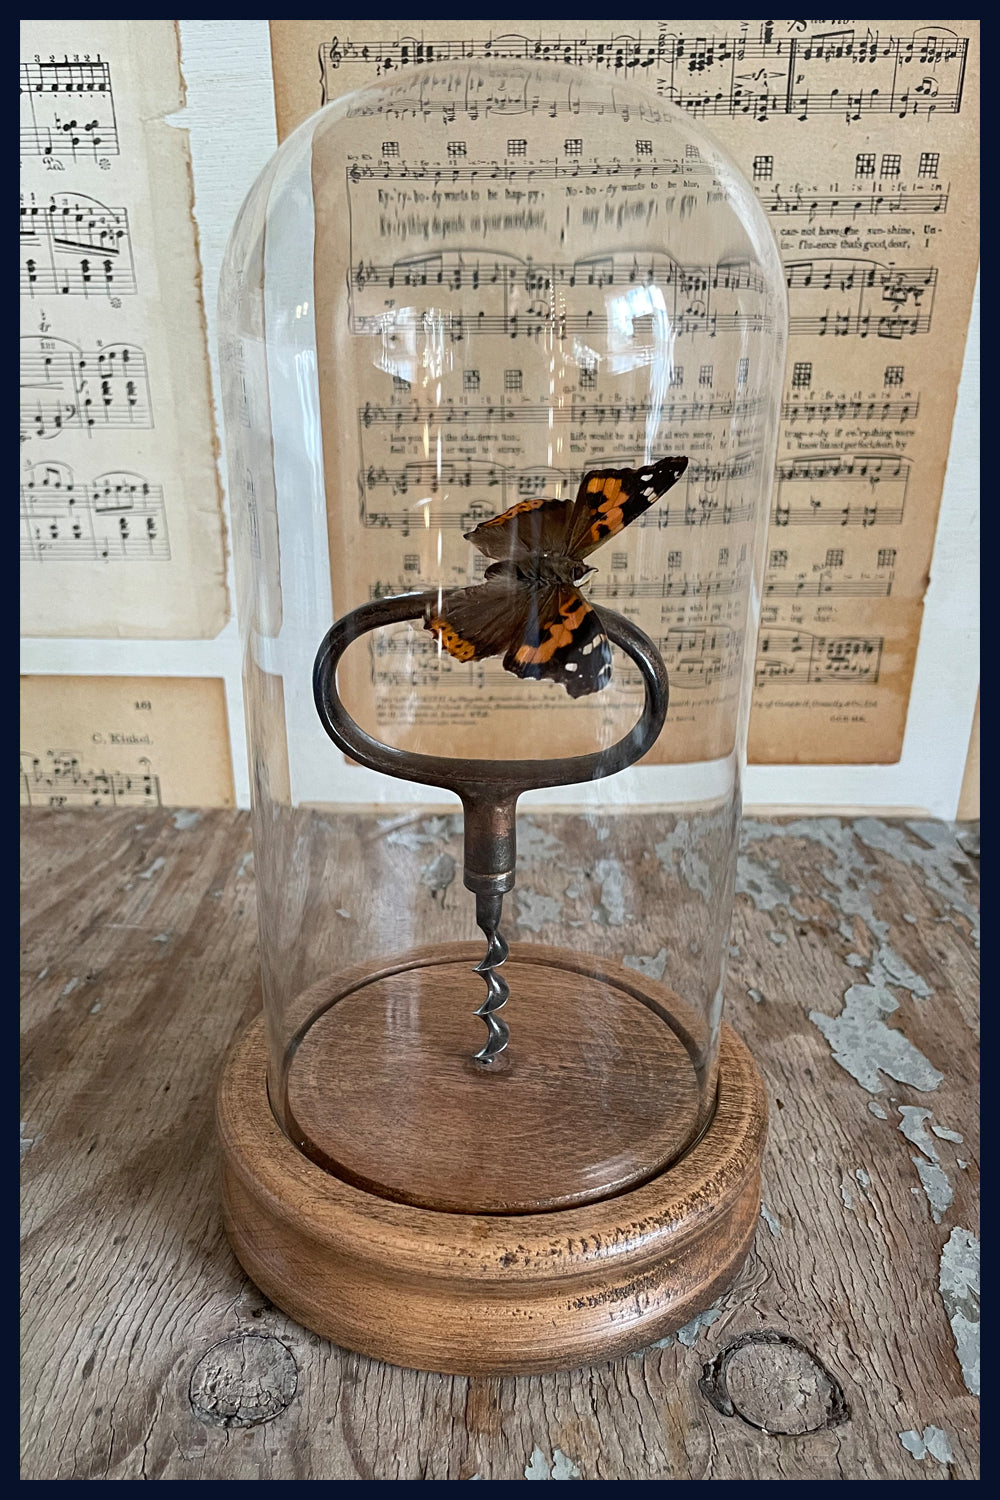 Enigma Variations Collection: Antique Bronze Corkscrew with a Vintage Red Admiral Butterfly in a Glass Display Dome